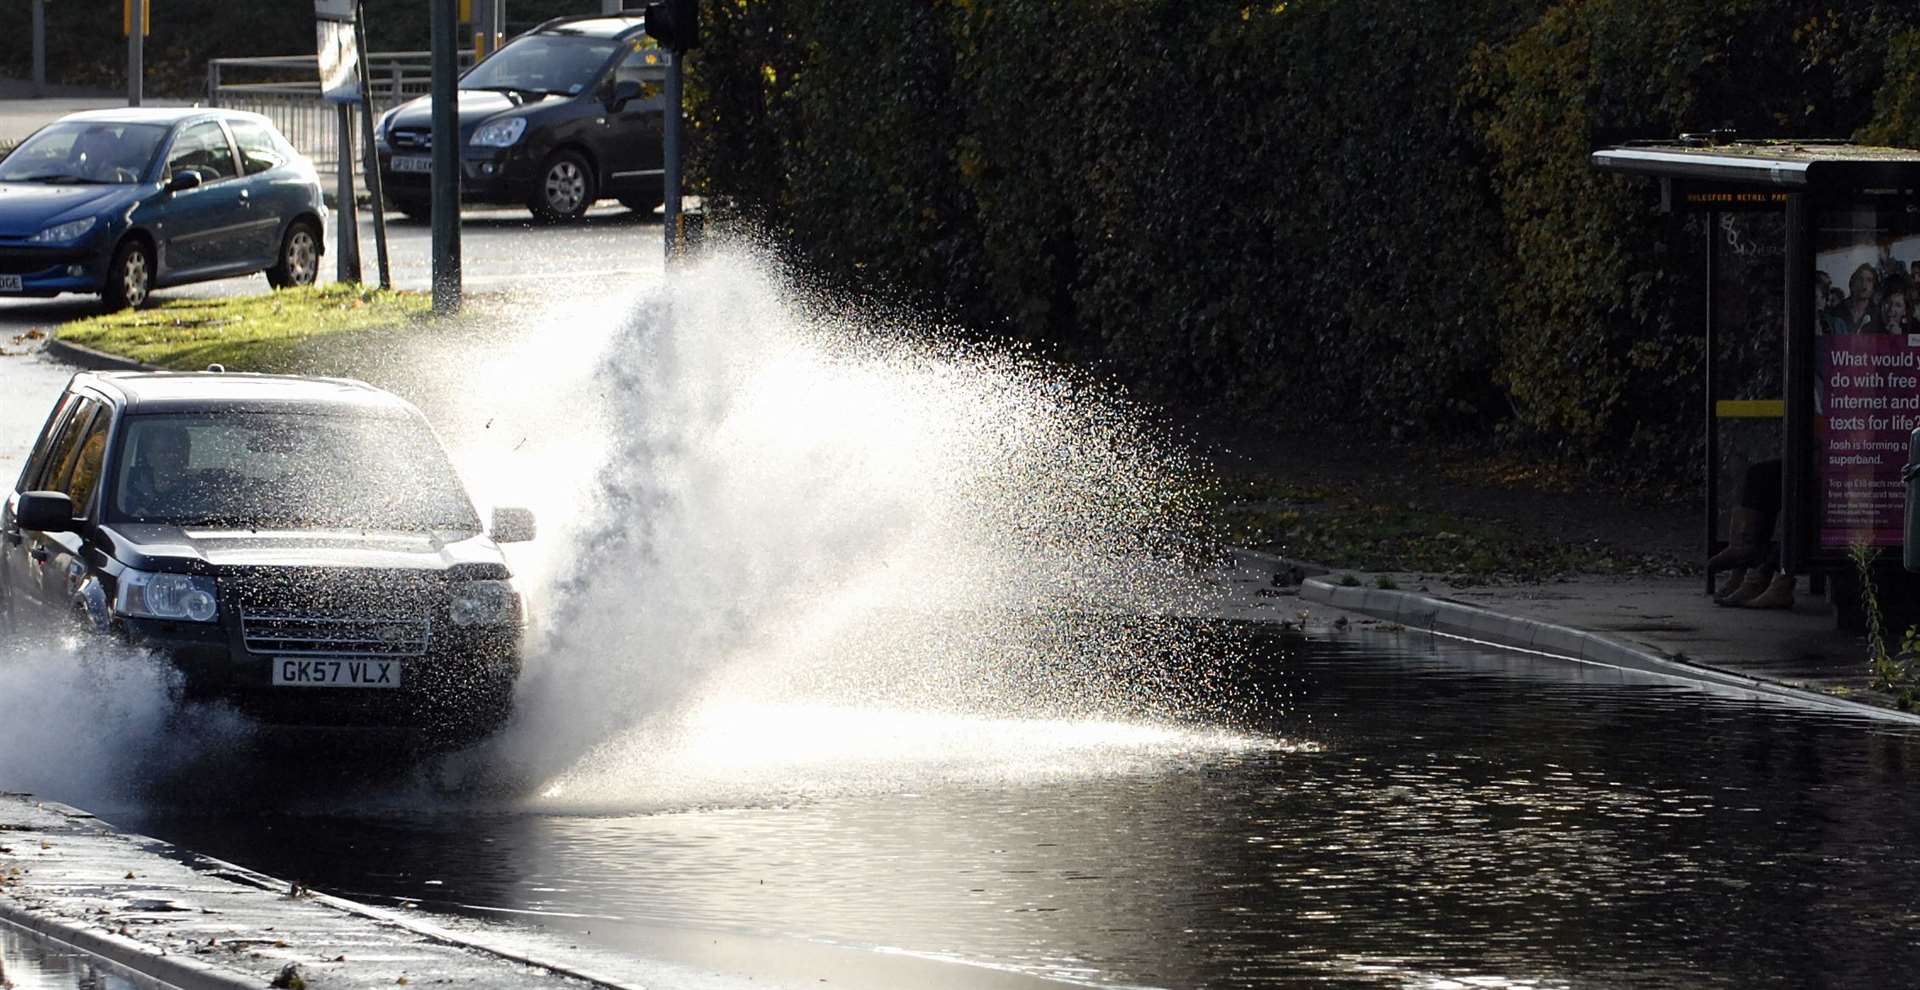 Flooding is a possibility next week, say forecasters